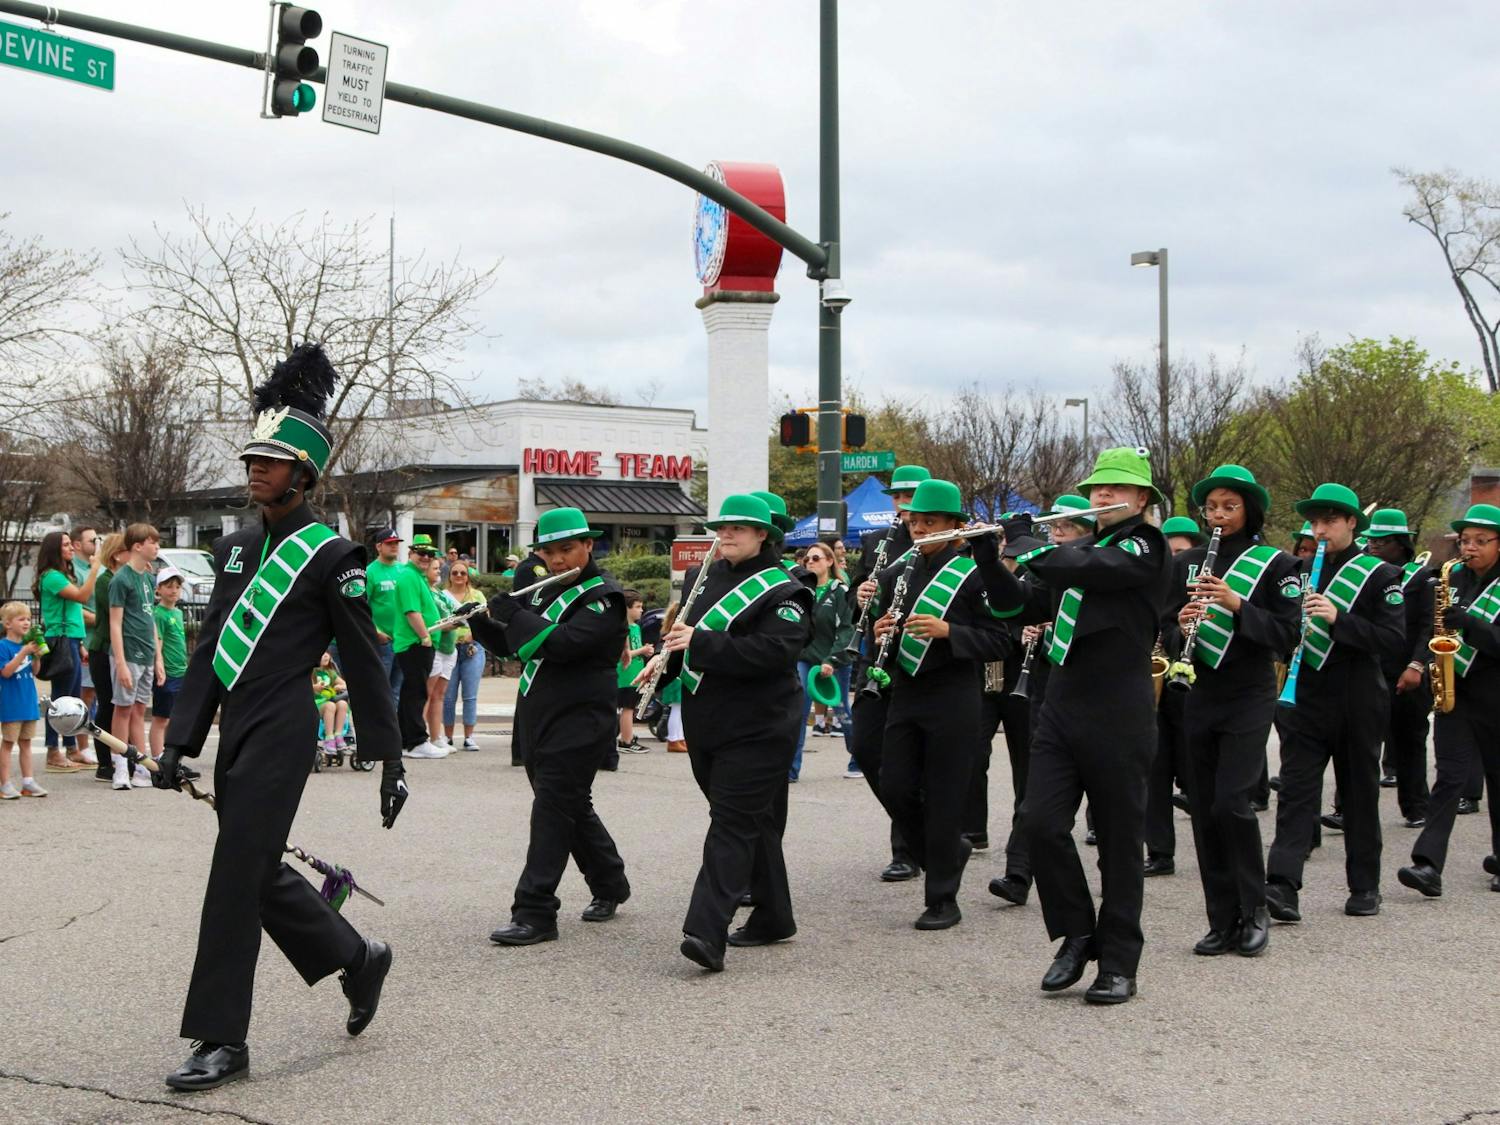 The Lakewood High School marching band walks in the 40th Annual St. Pats in 5 Points Parade. The local high school provided band members for the festival parade to march along floats, dancers, and other performers. 